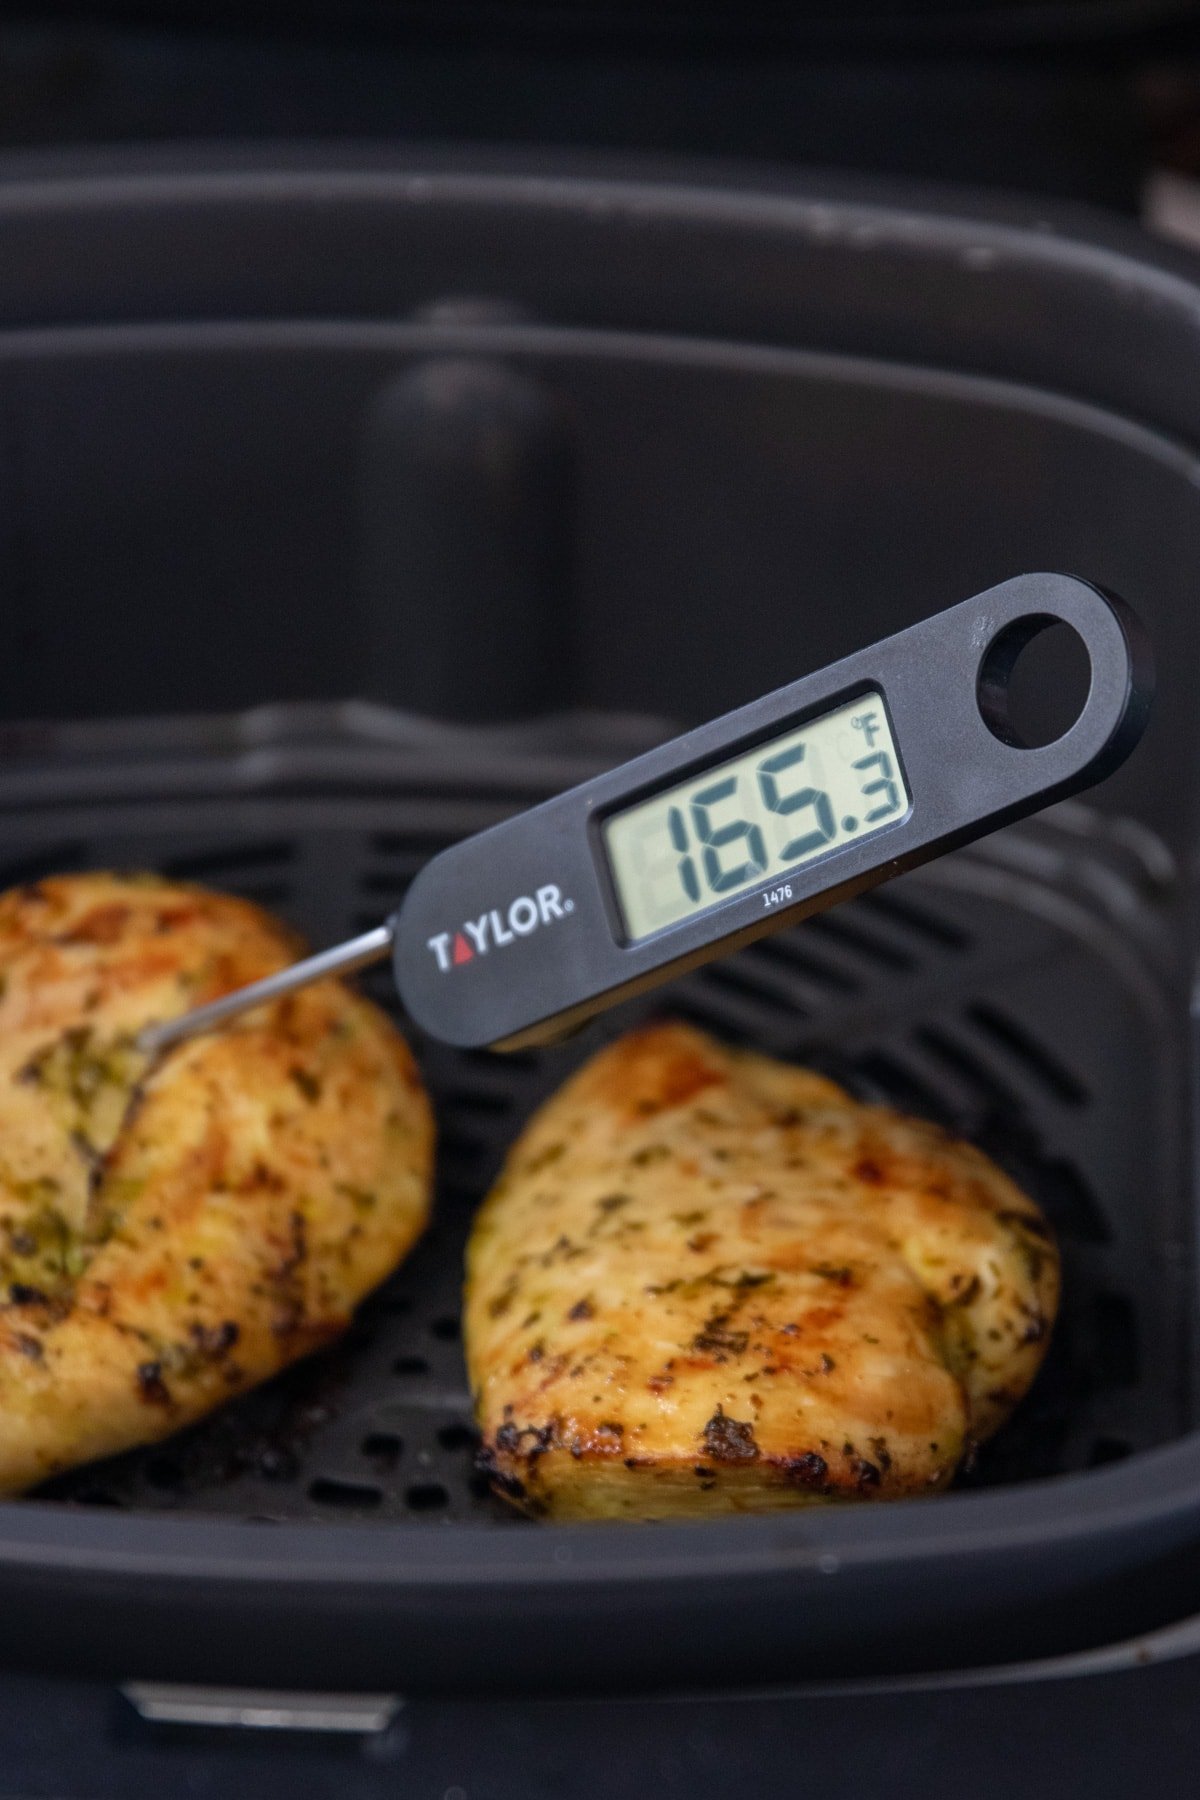 Food thermometer in cooked chicken reads 165F